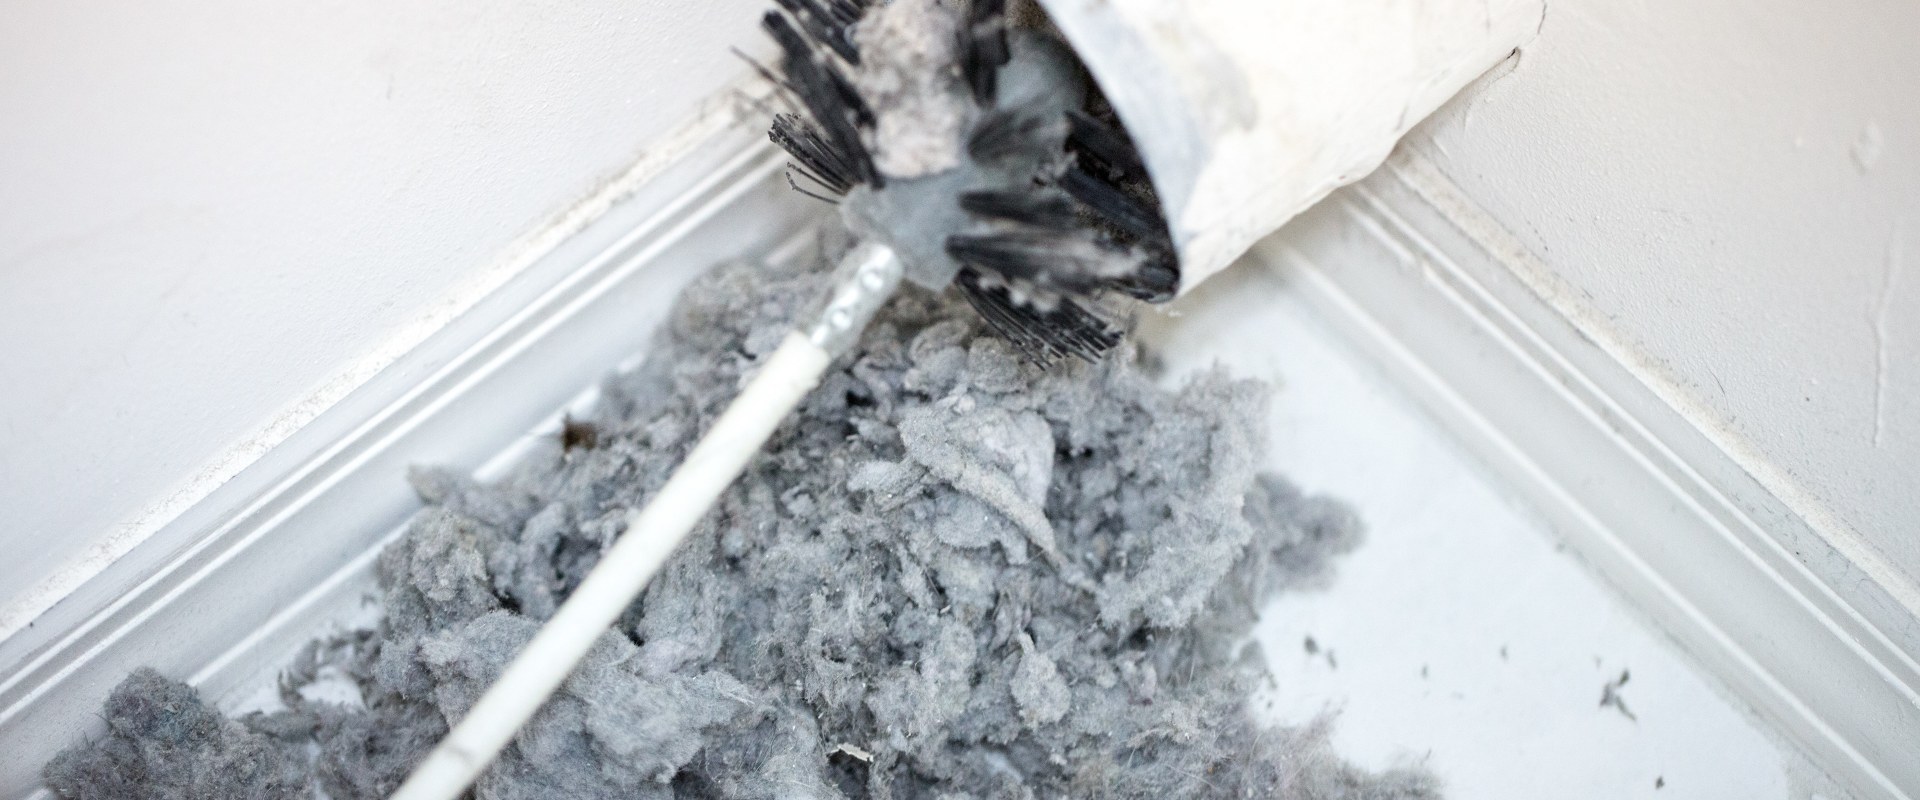 How to Clean a Dryer Vent: A Comprehensive Guide